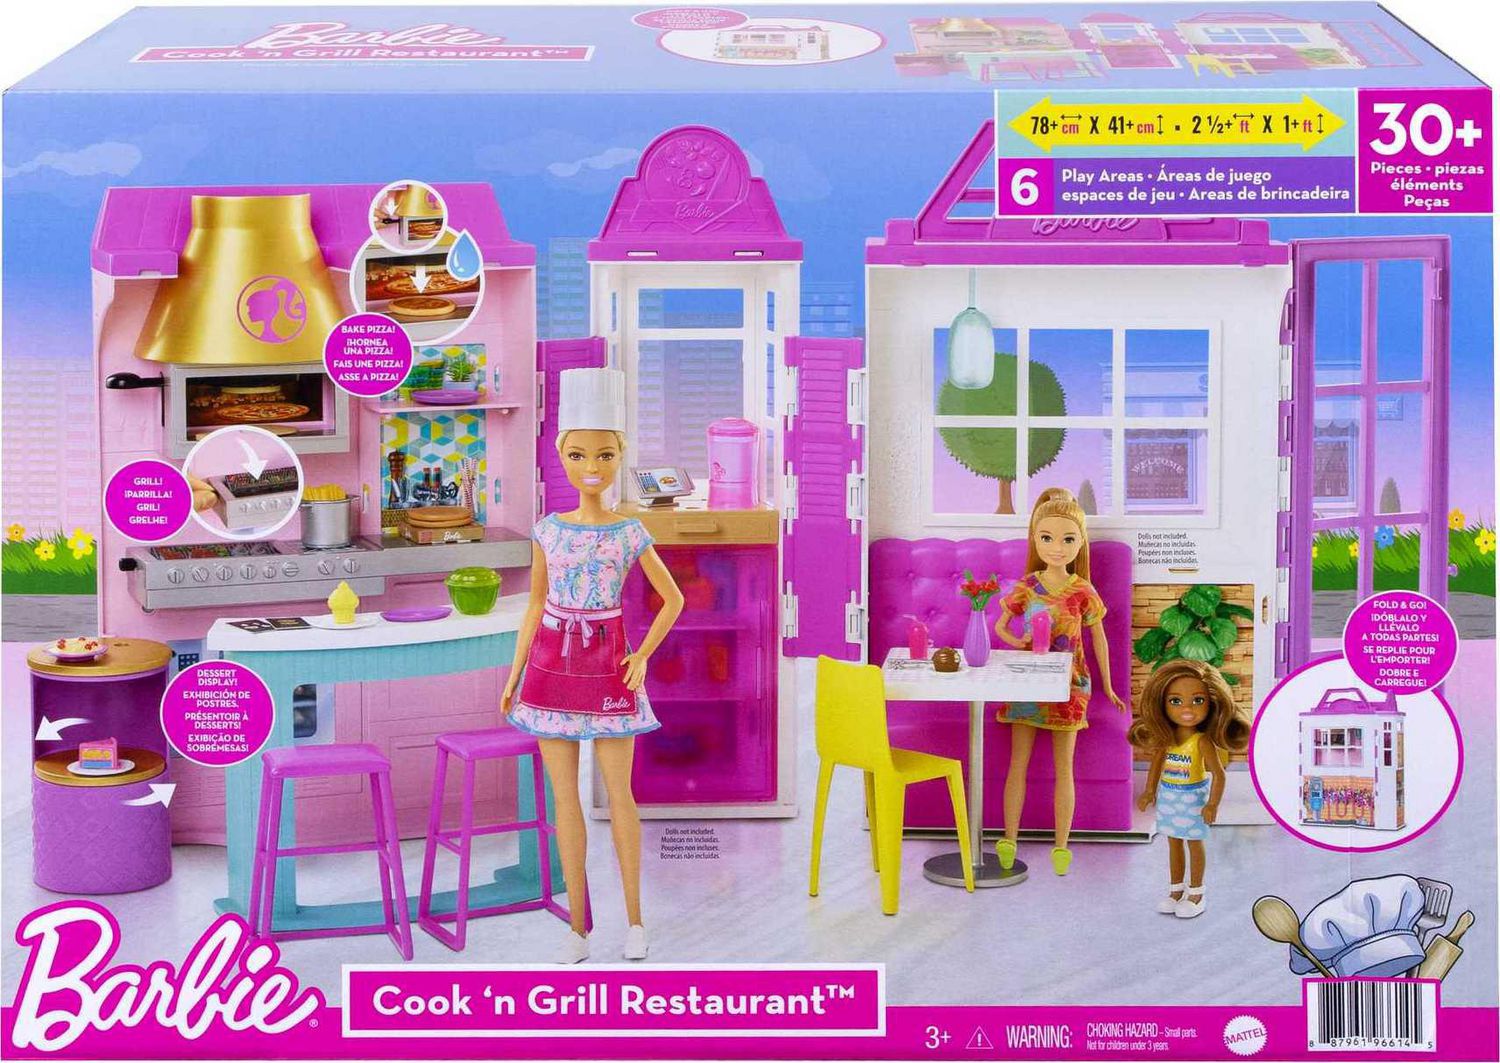 Barbie Cook 'n Grill Restaurant Playset with 30+ Pieces, Gift for